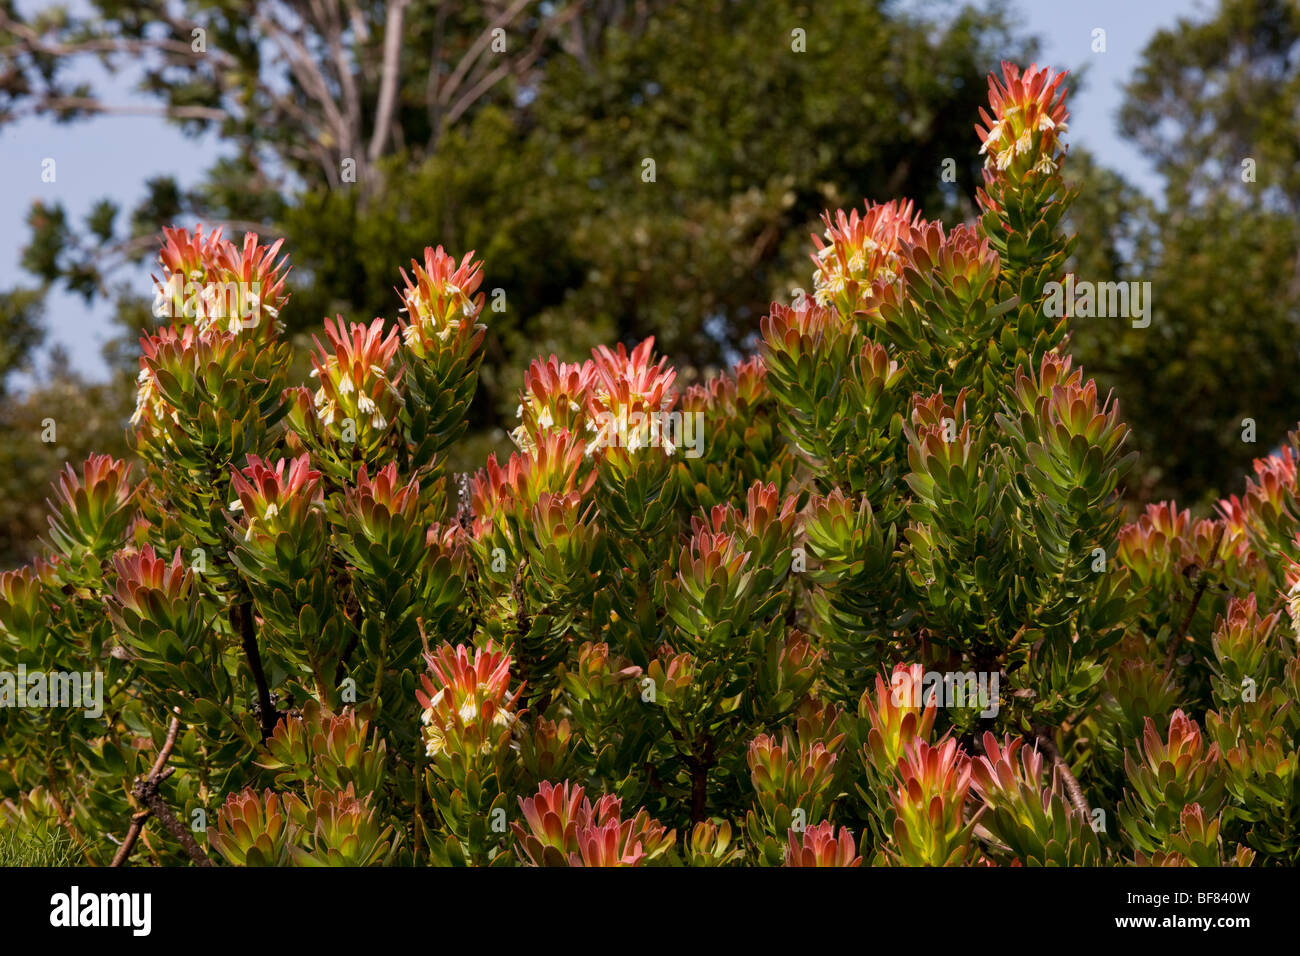 One of the Pagoda bushes, Mimetes cucullatus, Fynbos, Western Cape, South Africa Stock Photo